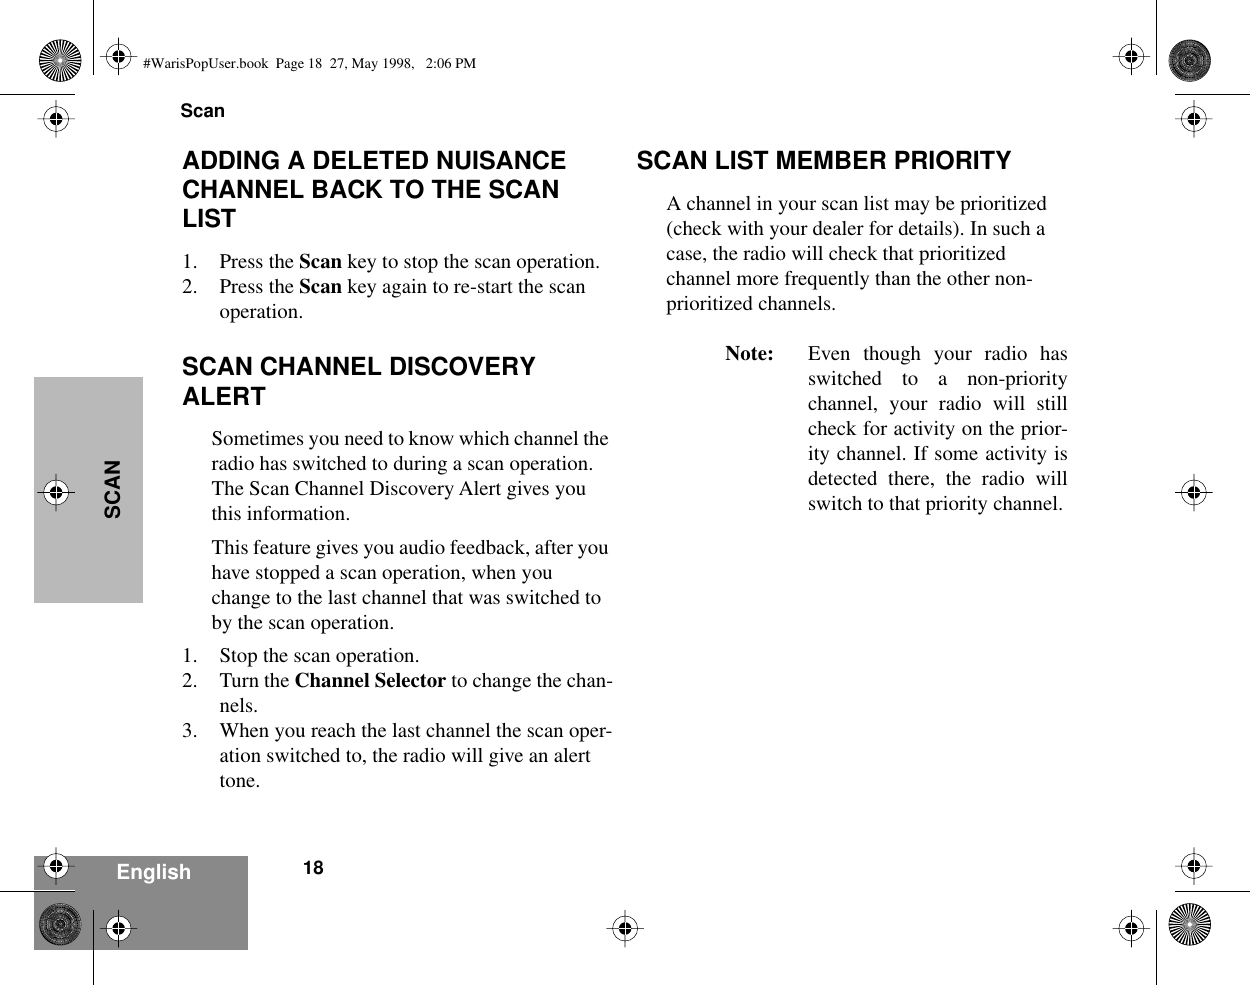  Scan18 EnglishSCAN ADDING A DELETED NUISANCE CHANNEL BACK TO THE SCAN LIST 1. Press the  Scan  key to stop the scan operation.2. Press the  Scan  key again to re-start the scan operation. SCAN CHANNEL DISCOVERY ALERT Sometimes you need to know which channel the radio has switched to during a scan operation. The Scan Channel Discovery Alert gives you this information.This feature gives you audio feedback, after you have stopped a scan operation, when you change to the last channel that was switched to by the scan operation.1. Stop the scan operation.2. Turn the  Channel Selector  to change the chan-nels.3. When you reach the last channel the scan oper-ation switched to, the radio will give an alert tone. SCAN LIST MEMBER PRIORITY A channel in your scan list may be prioritized (check with your dealer for details). In such a case, the radio will check that prioritized channel more frequently than the other non-prioritized channels. Note: Even though your radio hasswitched to a non-prioritychannel, your radio will stillcheck for activity on the prior-ity channel. If some activity isdetected there, the radio willswitch to that priority channel. #WarisPopUser.book  Page 18  27, May 1998,   2:06 PM